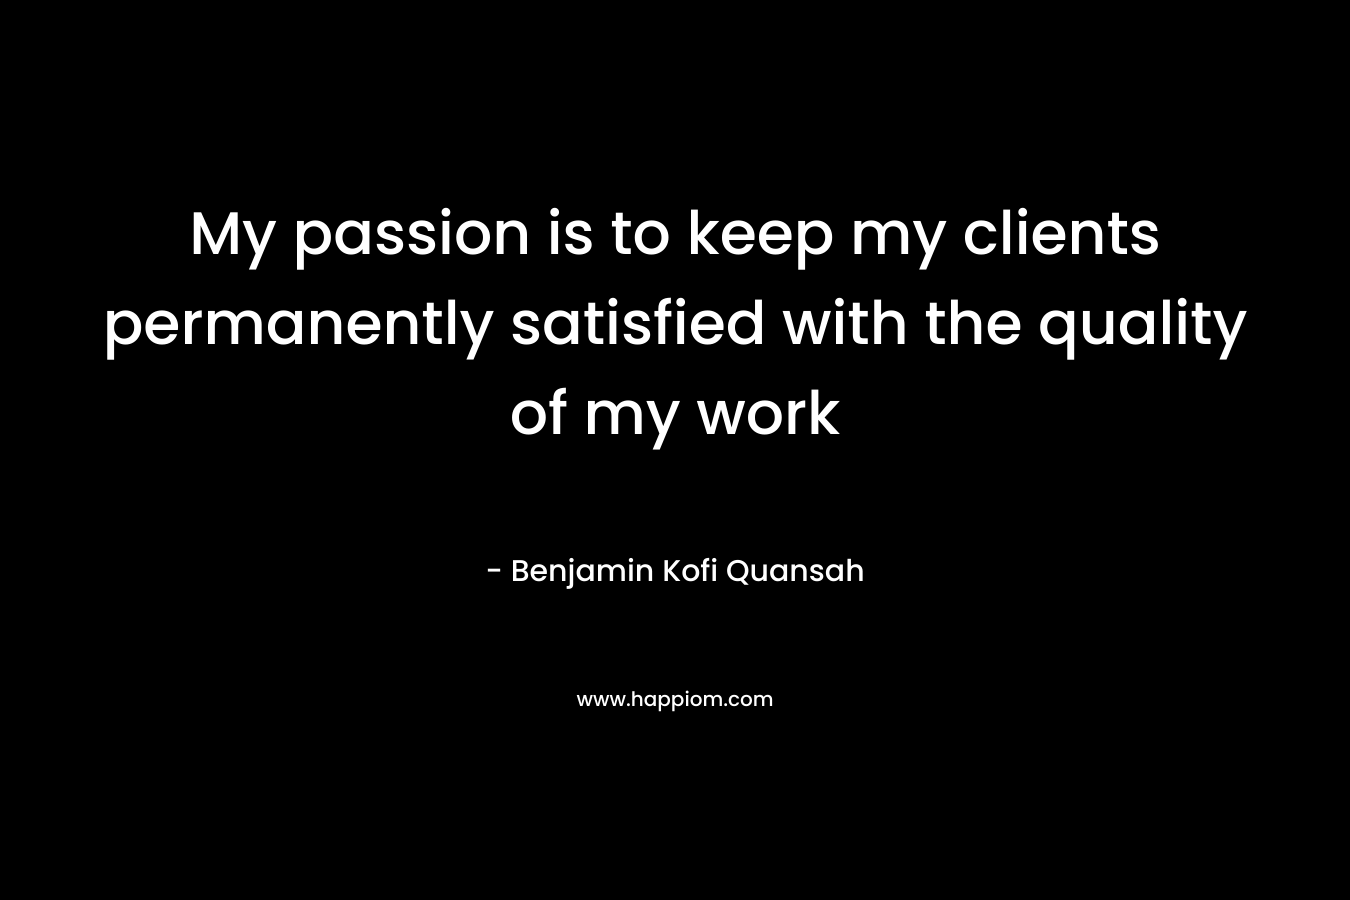 My passion is to keep my clients permanently satisfied with the quality of my work